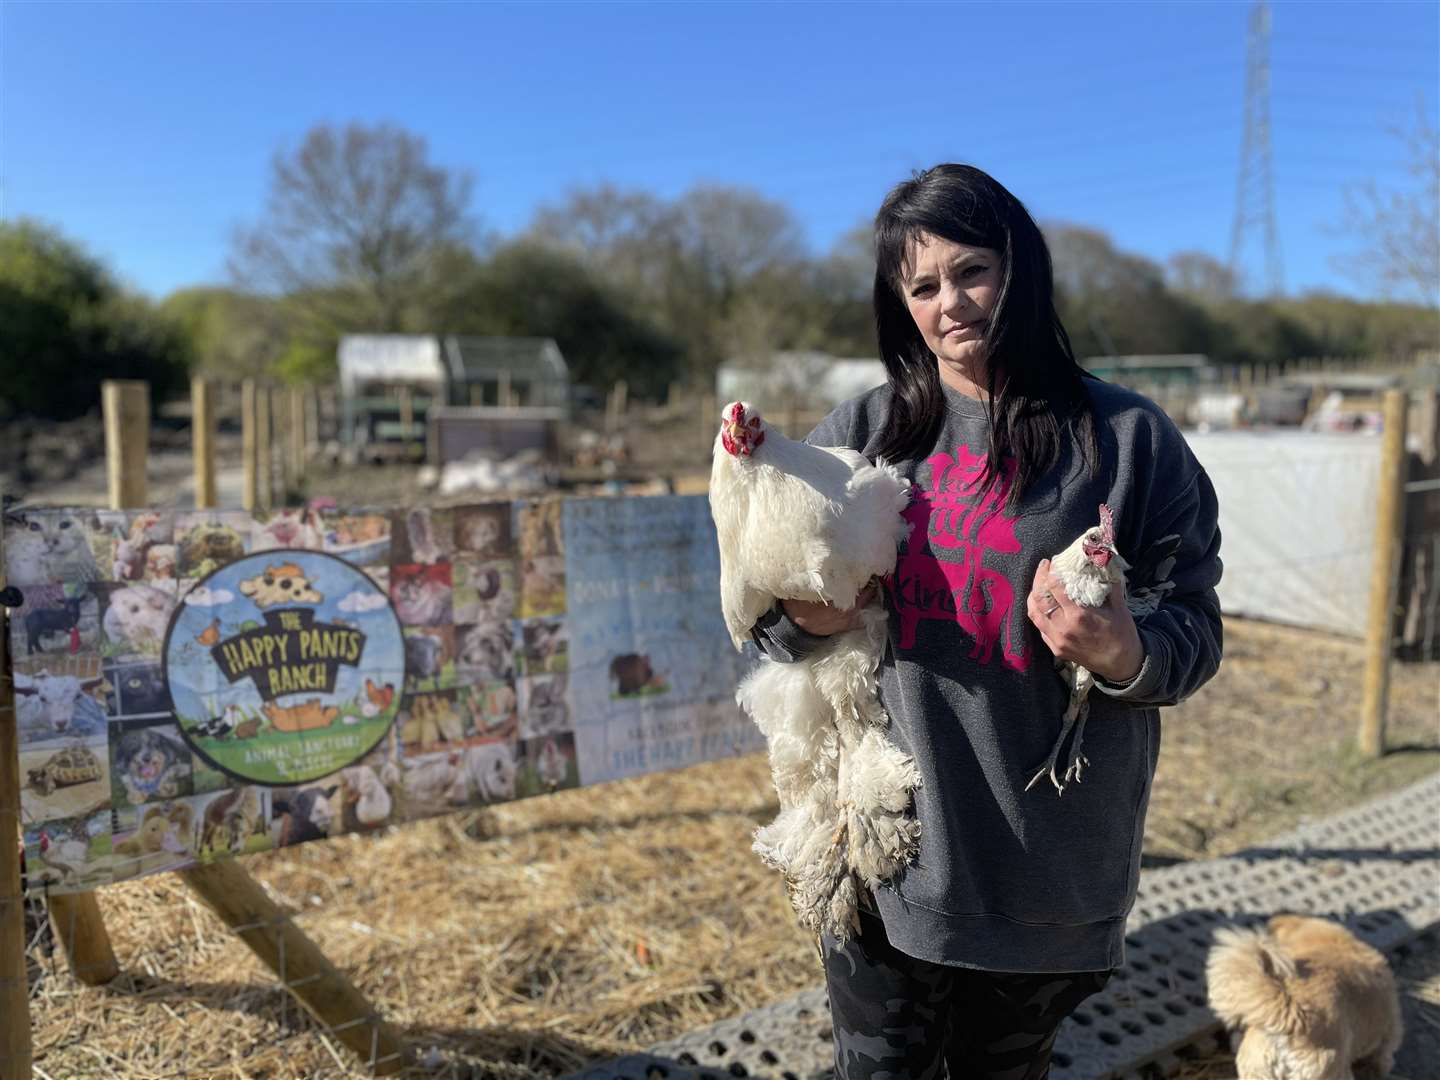 Founder Amey James, with cockerels, at The Happy Pants Ranch animal sanctuary in Iwade Lane, Bobbing